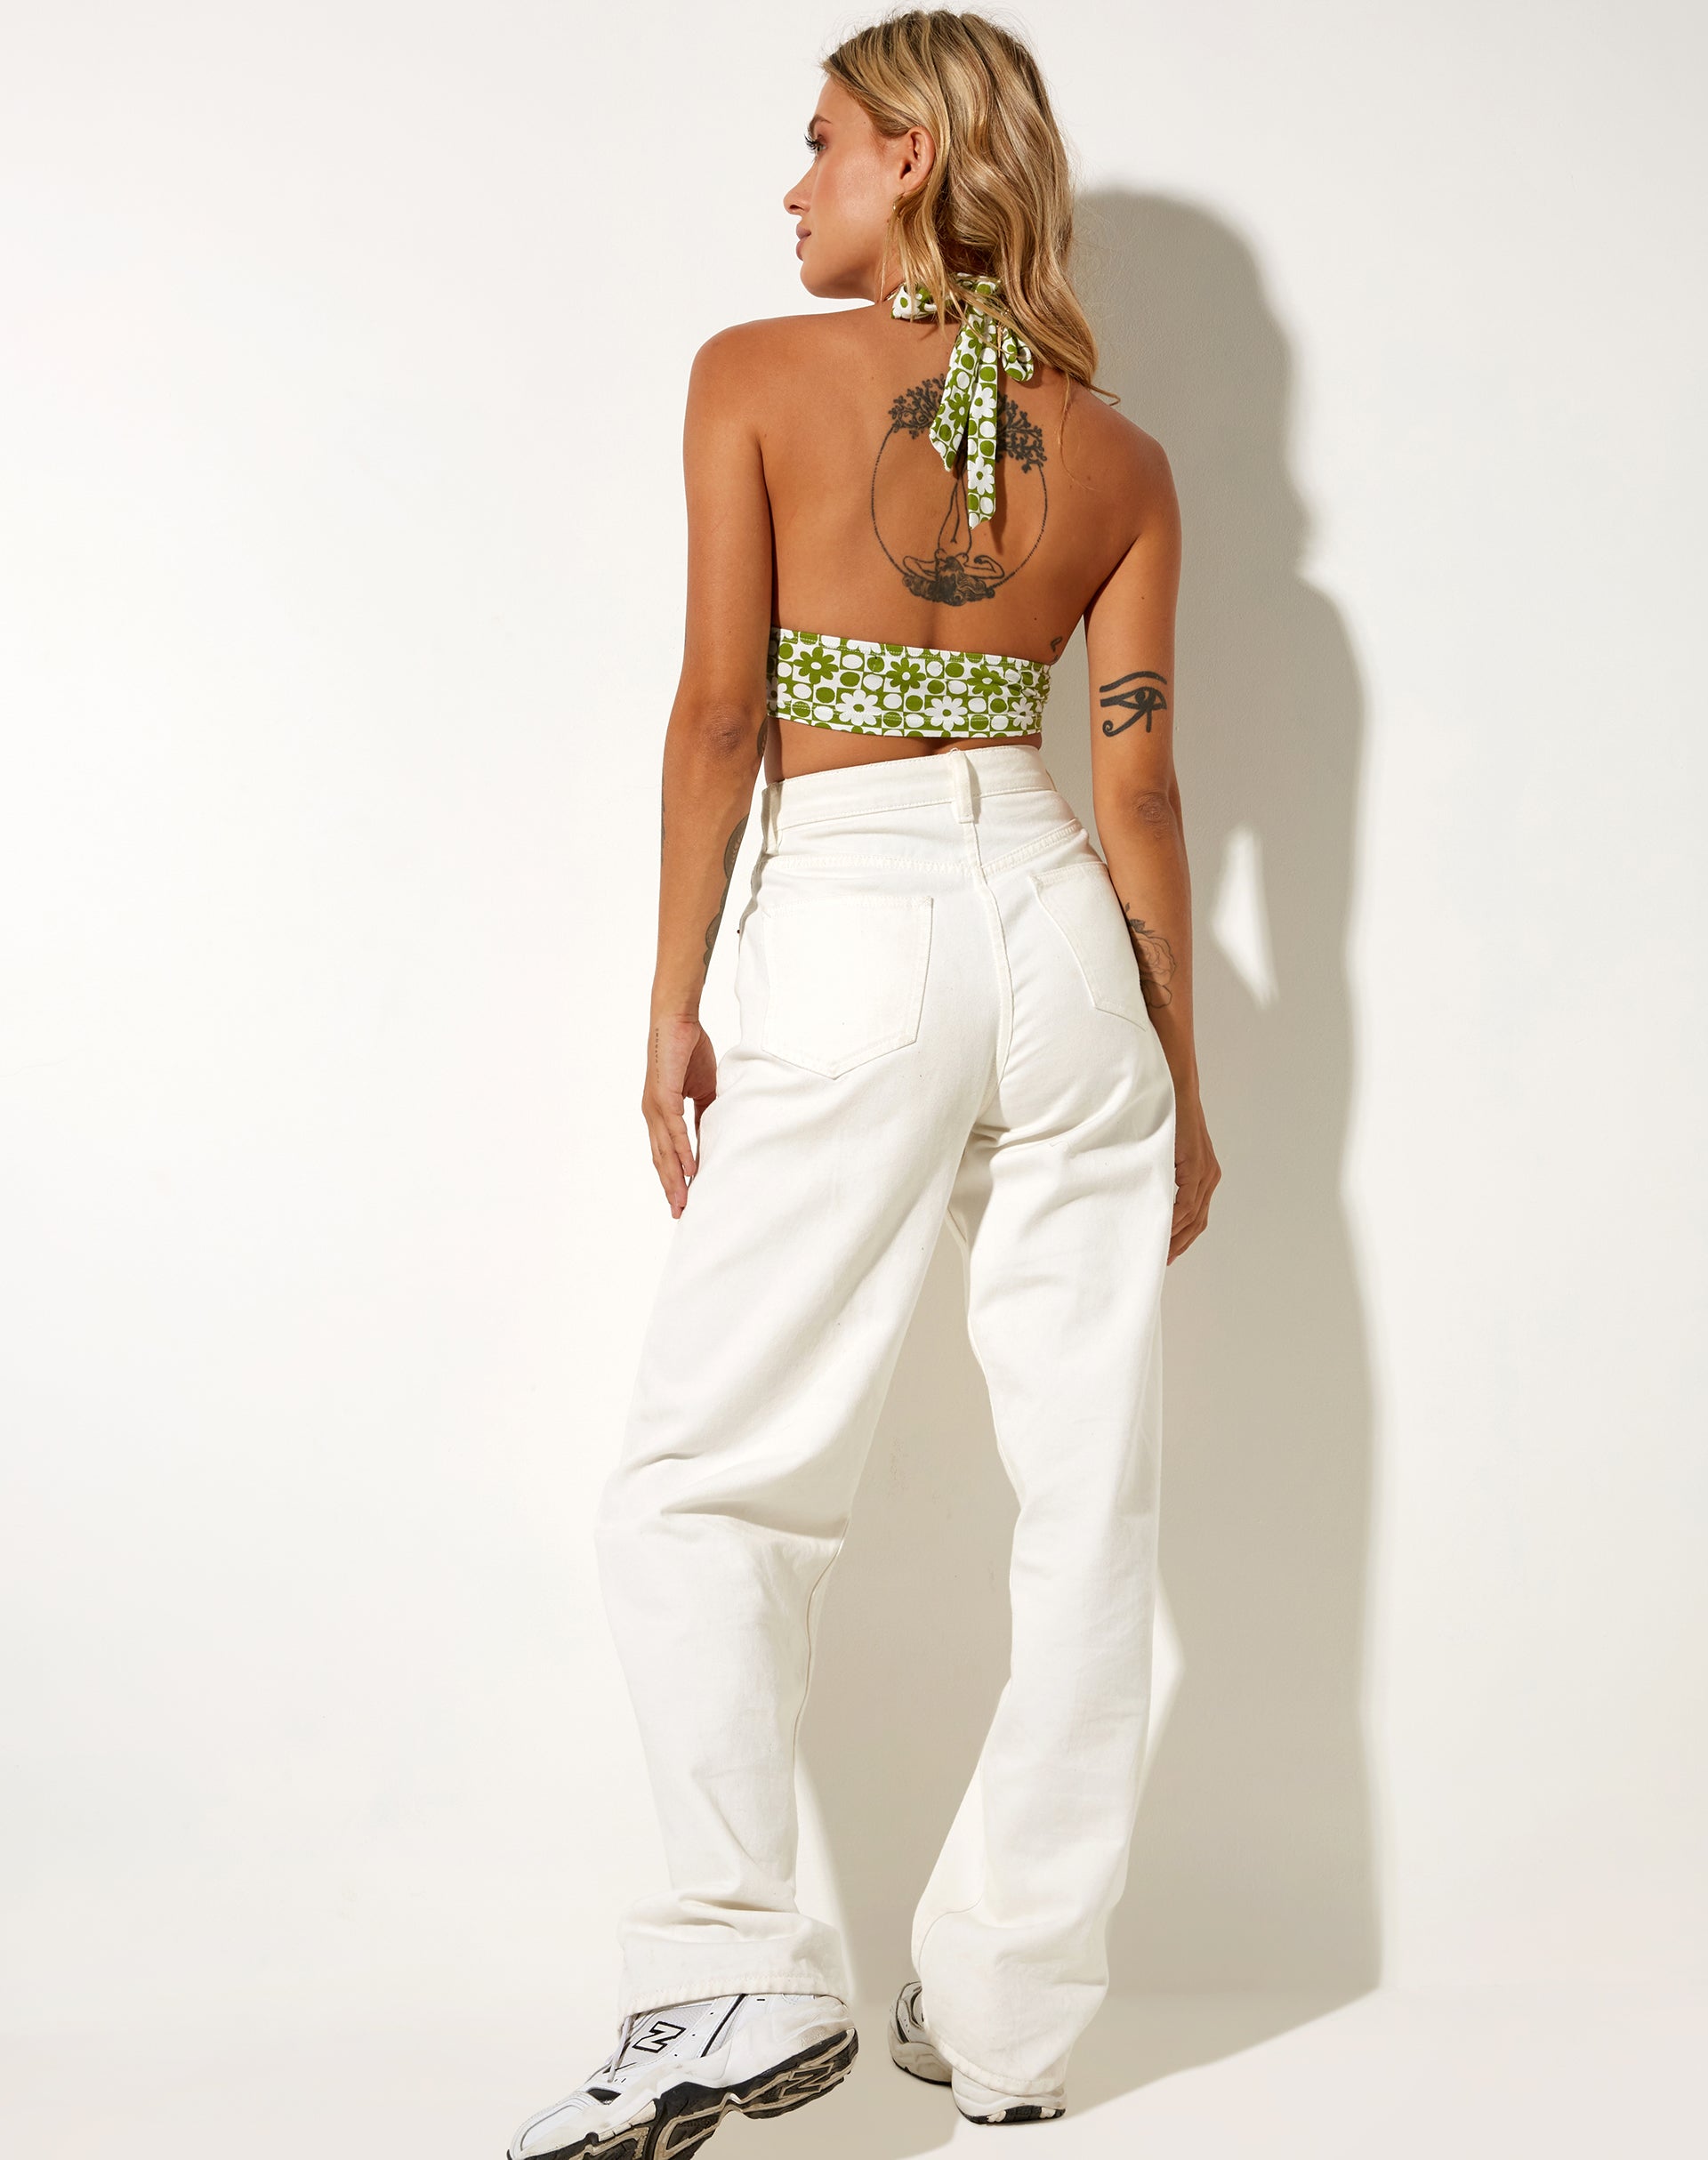 Image of Jica Crop Top in Patchwork Daisy Green